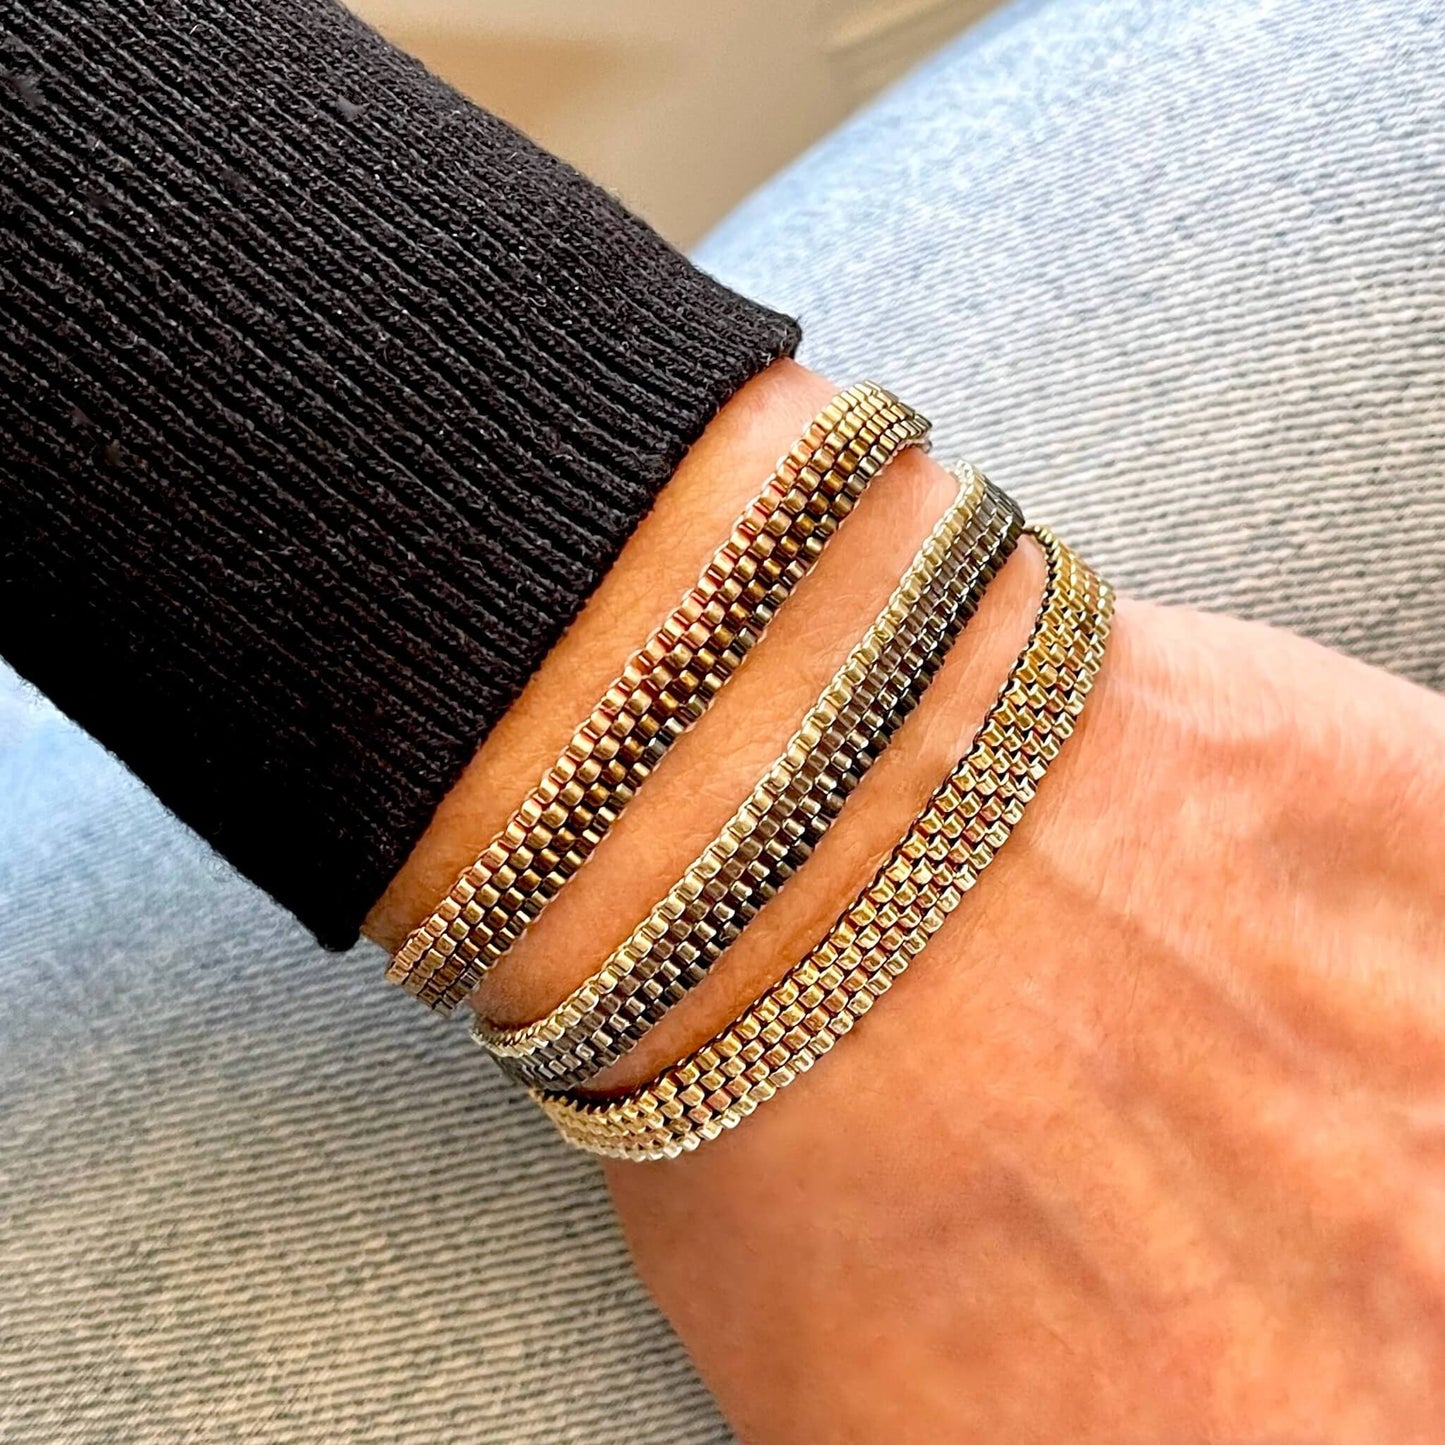 Trending beaded bracelets with metallic seed beads. Horizontal striped ombre pattern.